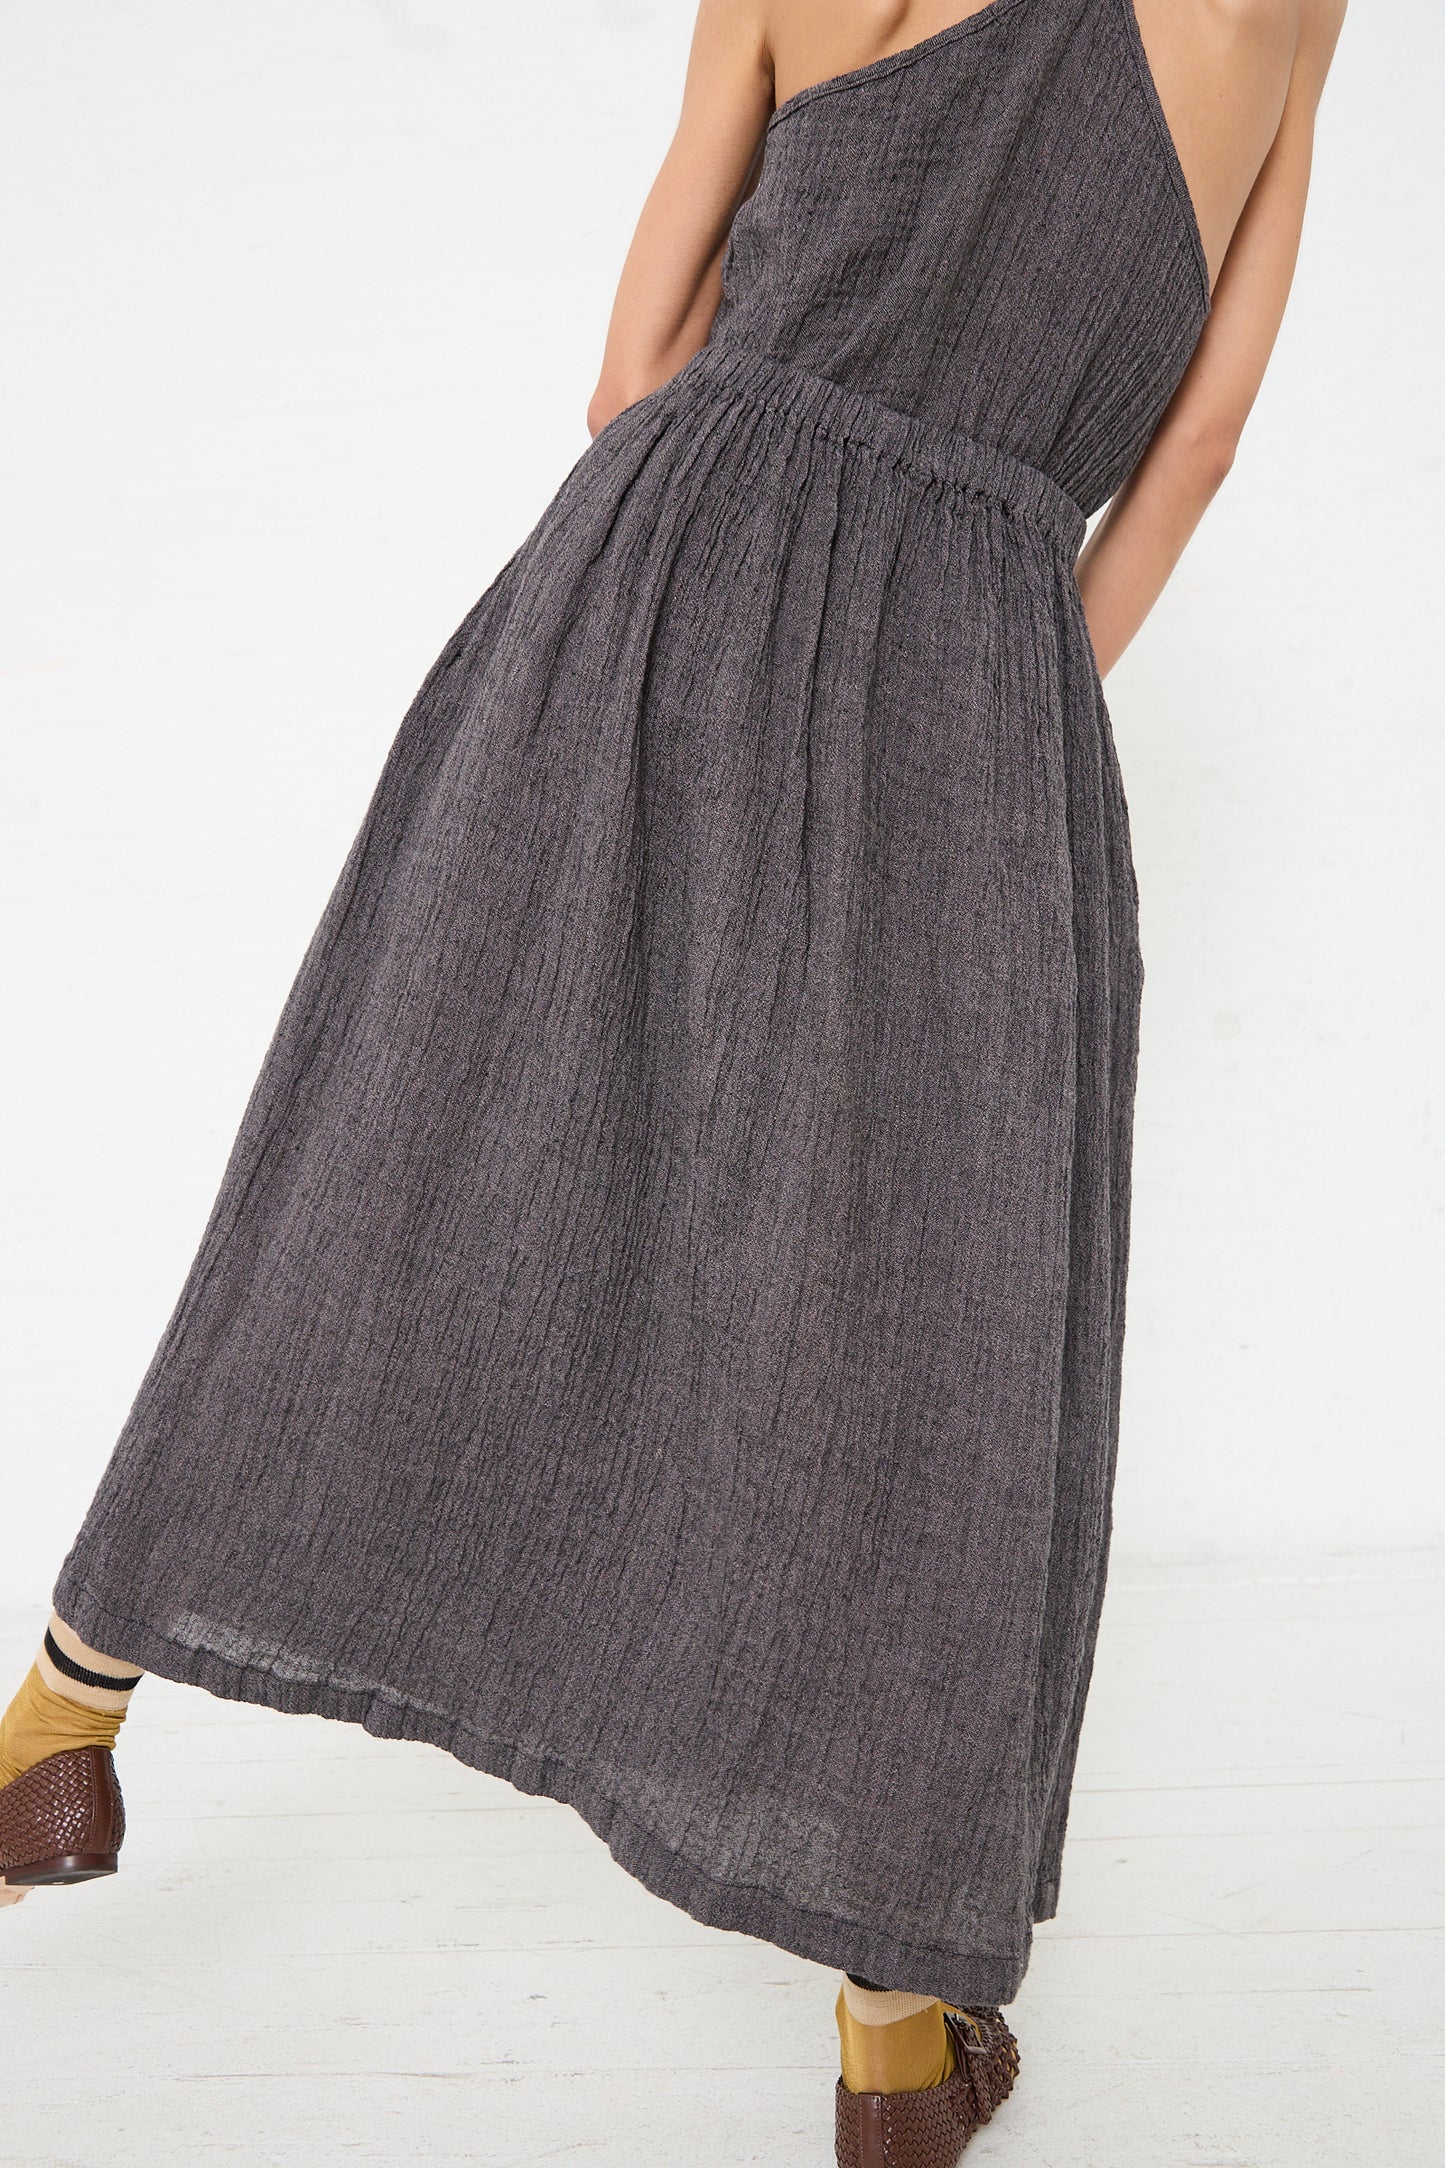 A person wearing a one-shoulder, full-length grey dress with a Linen Classic Skirt in Grey Navy by Black Crane and brown woven platform sandals by Black Crane.